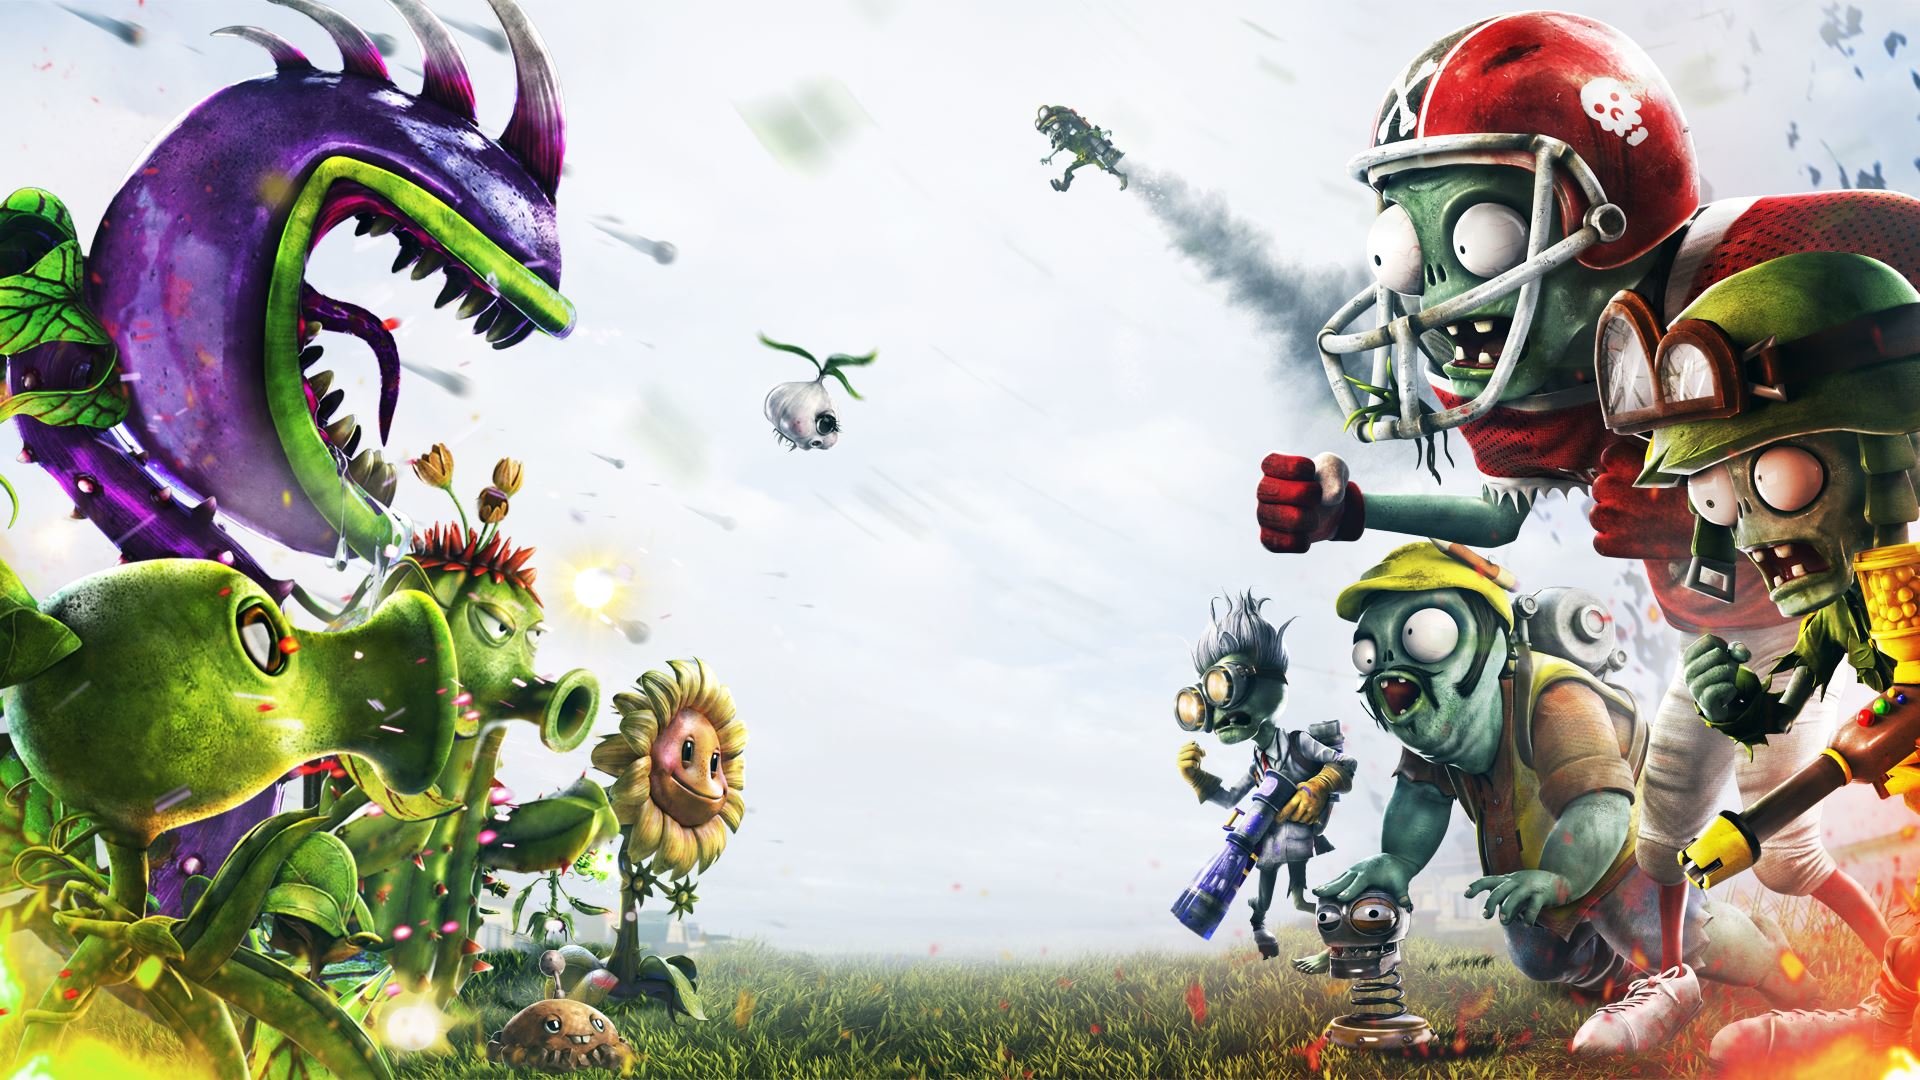 Best Plants Vs Zombies (PVZ) background ID:131567 for High Resolution hd 1080p computer